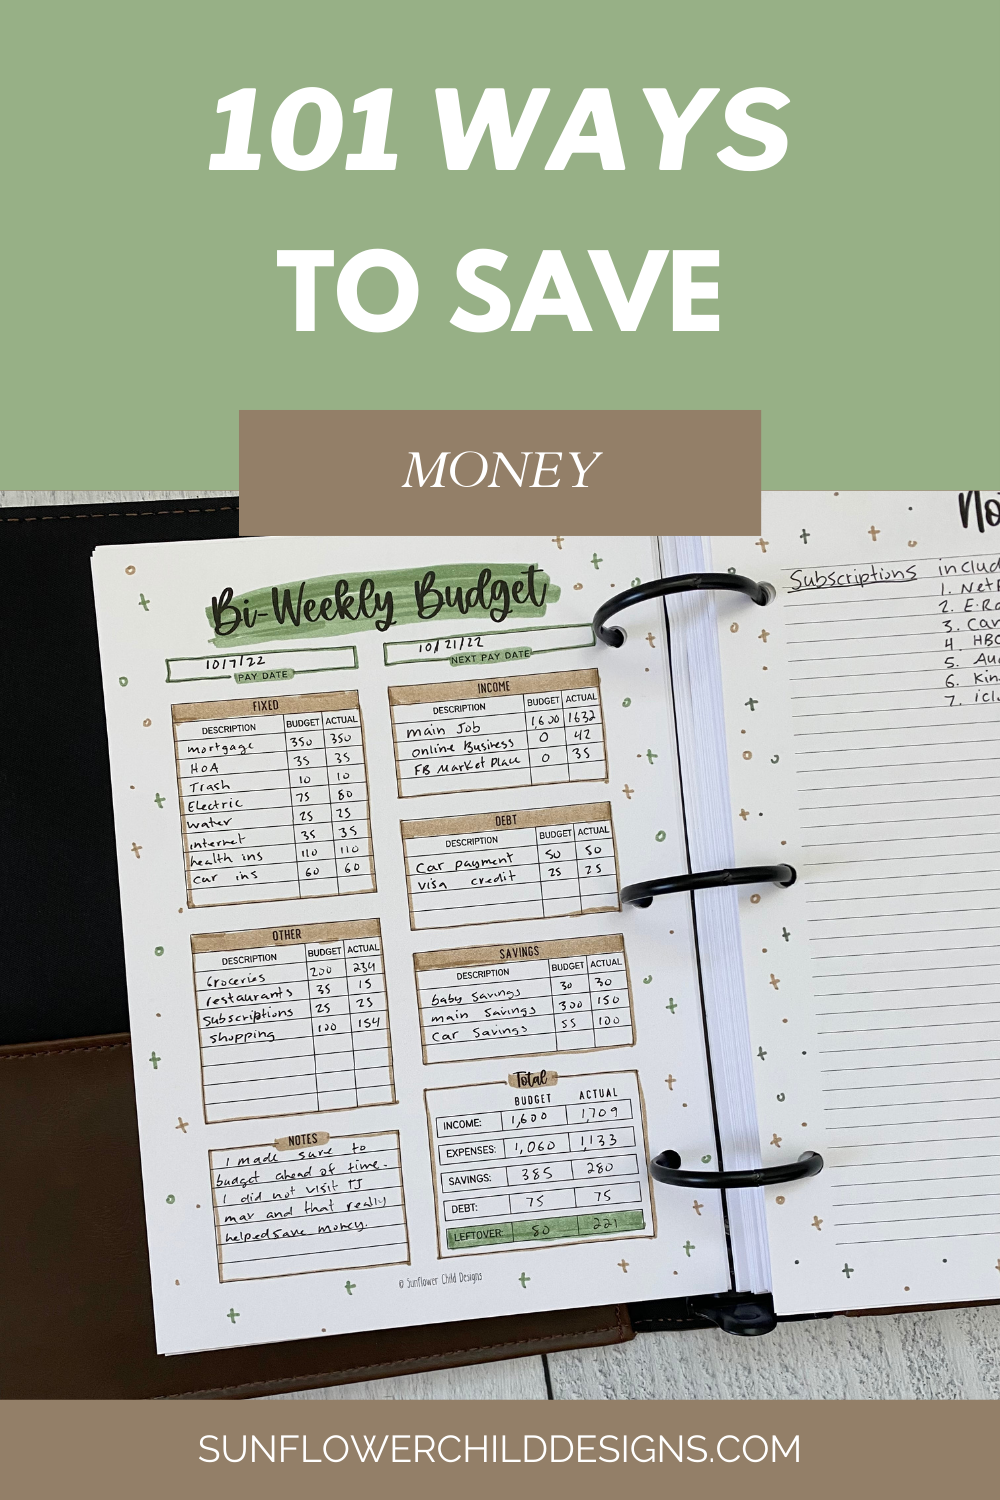 Ways to Save Money and Pay off Debt